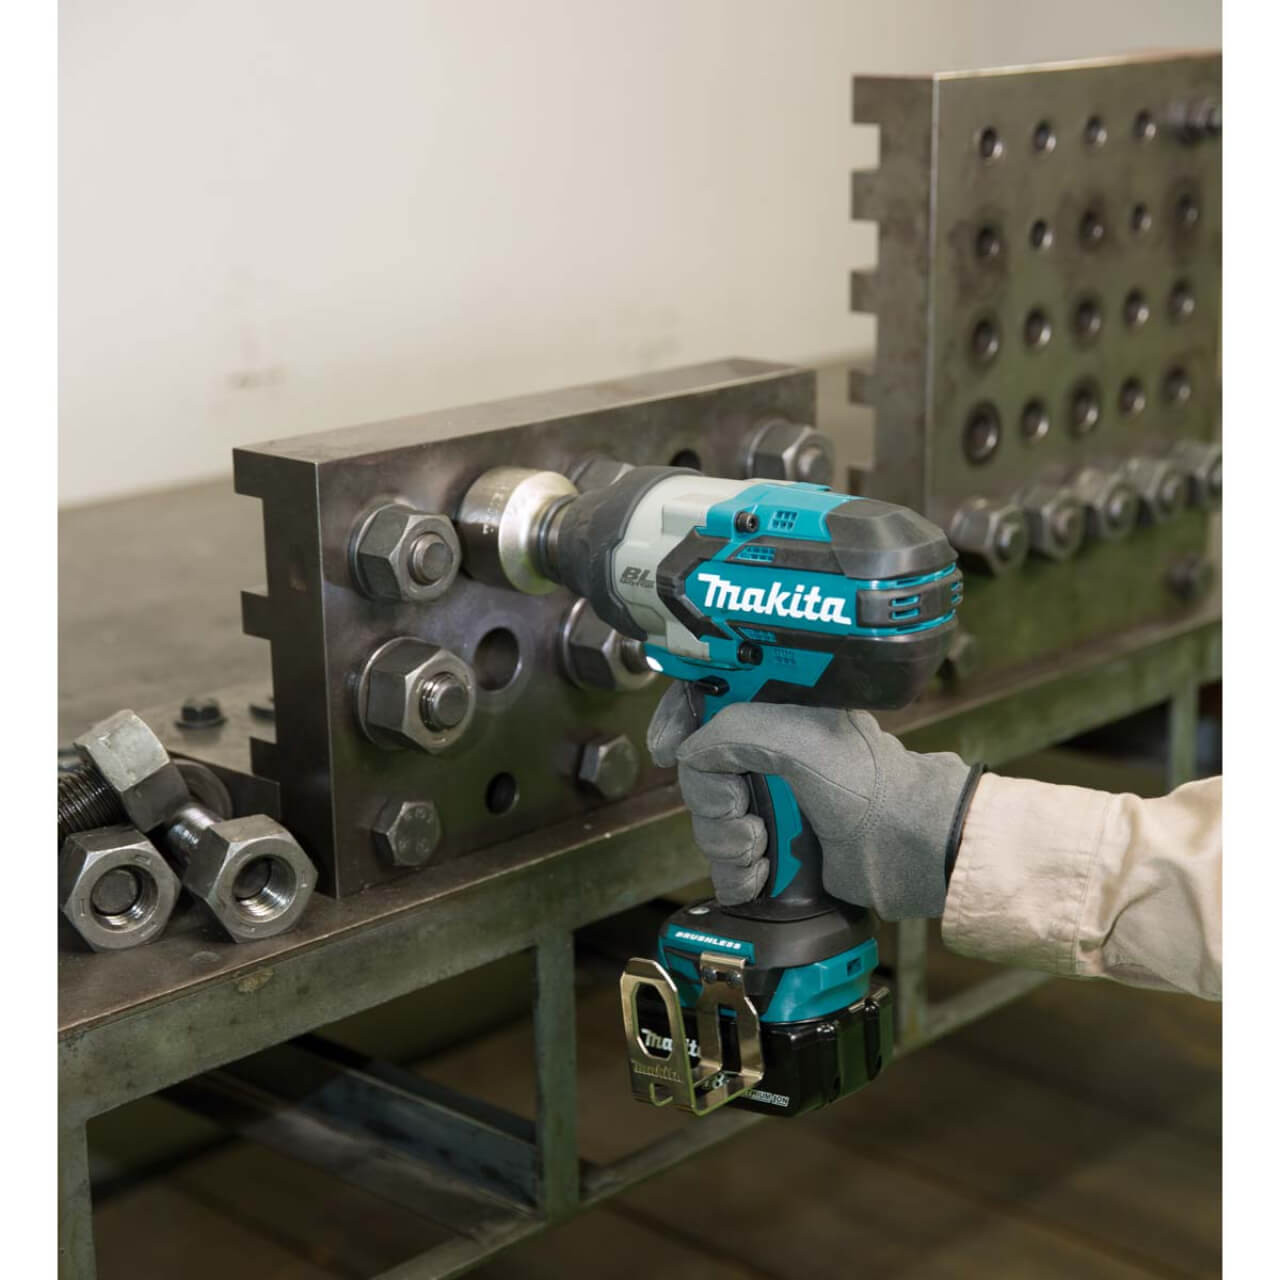 Makita 18V Brushless 3/4” Impact Wrench. 1.050Nm - Tool Only